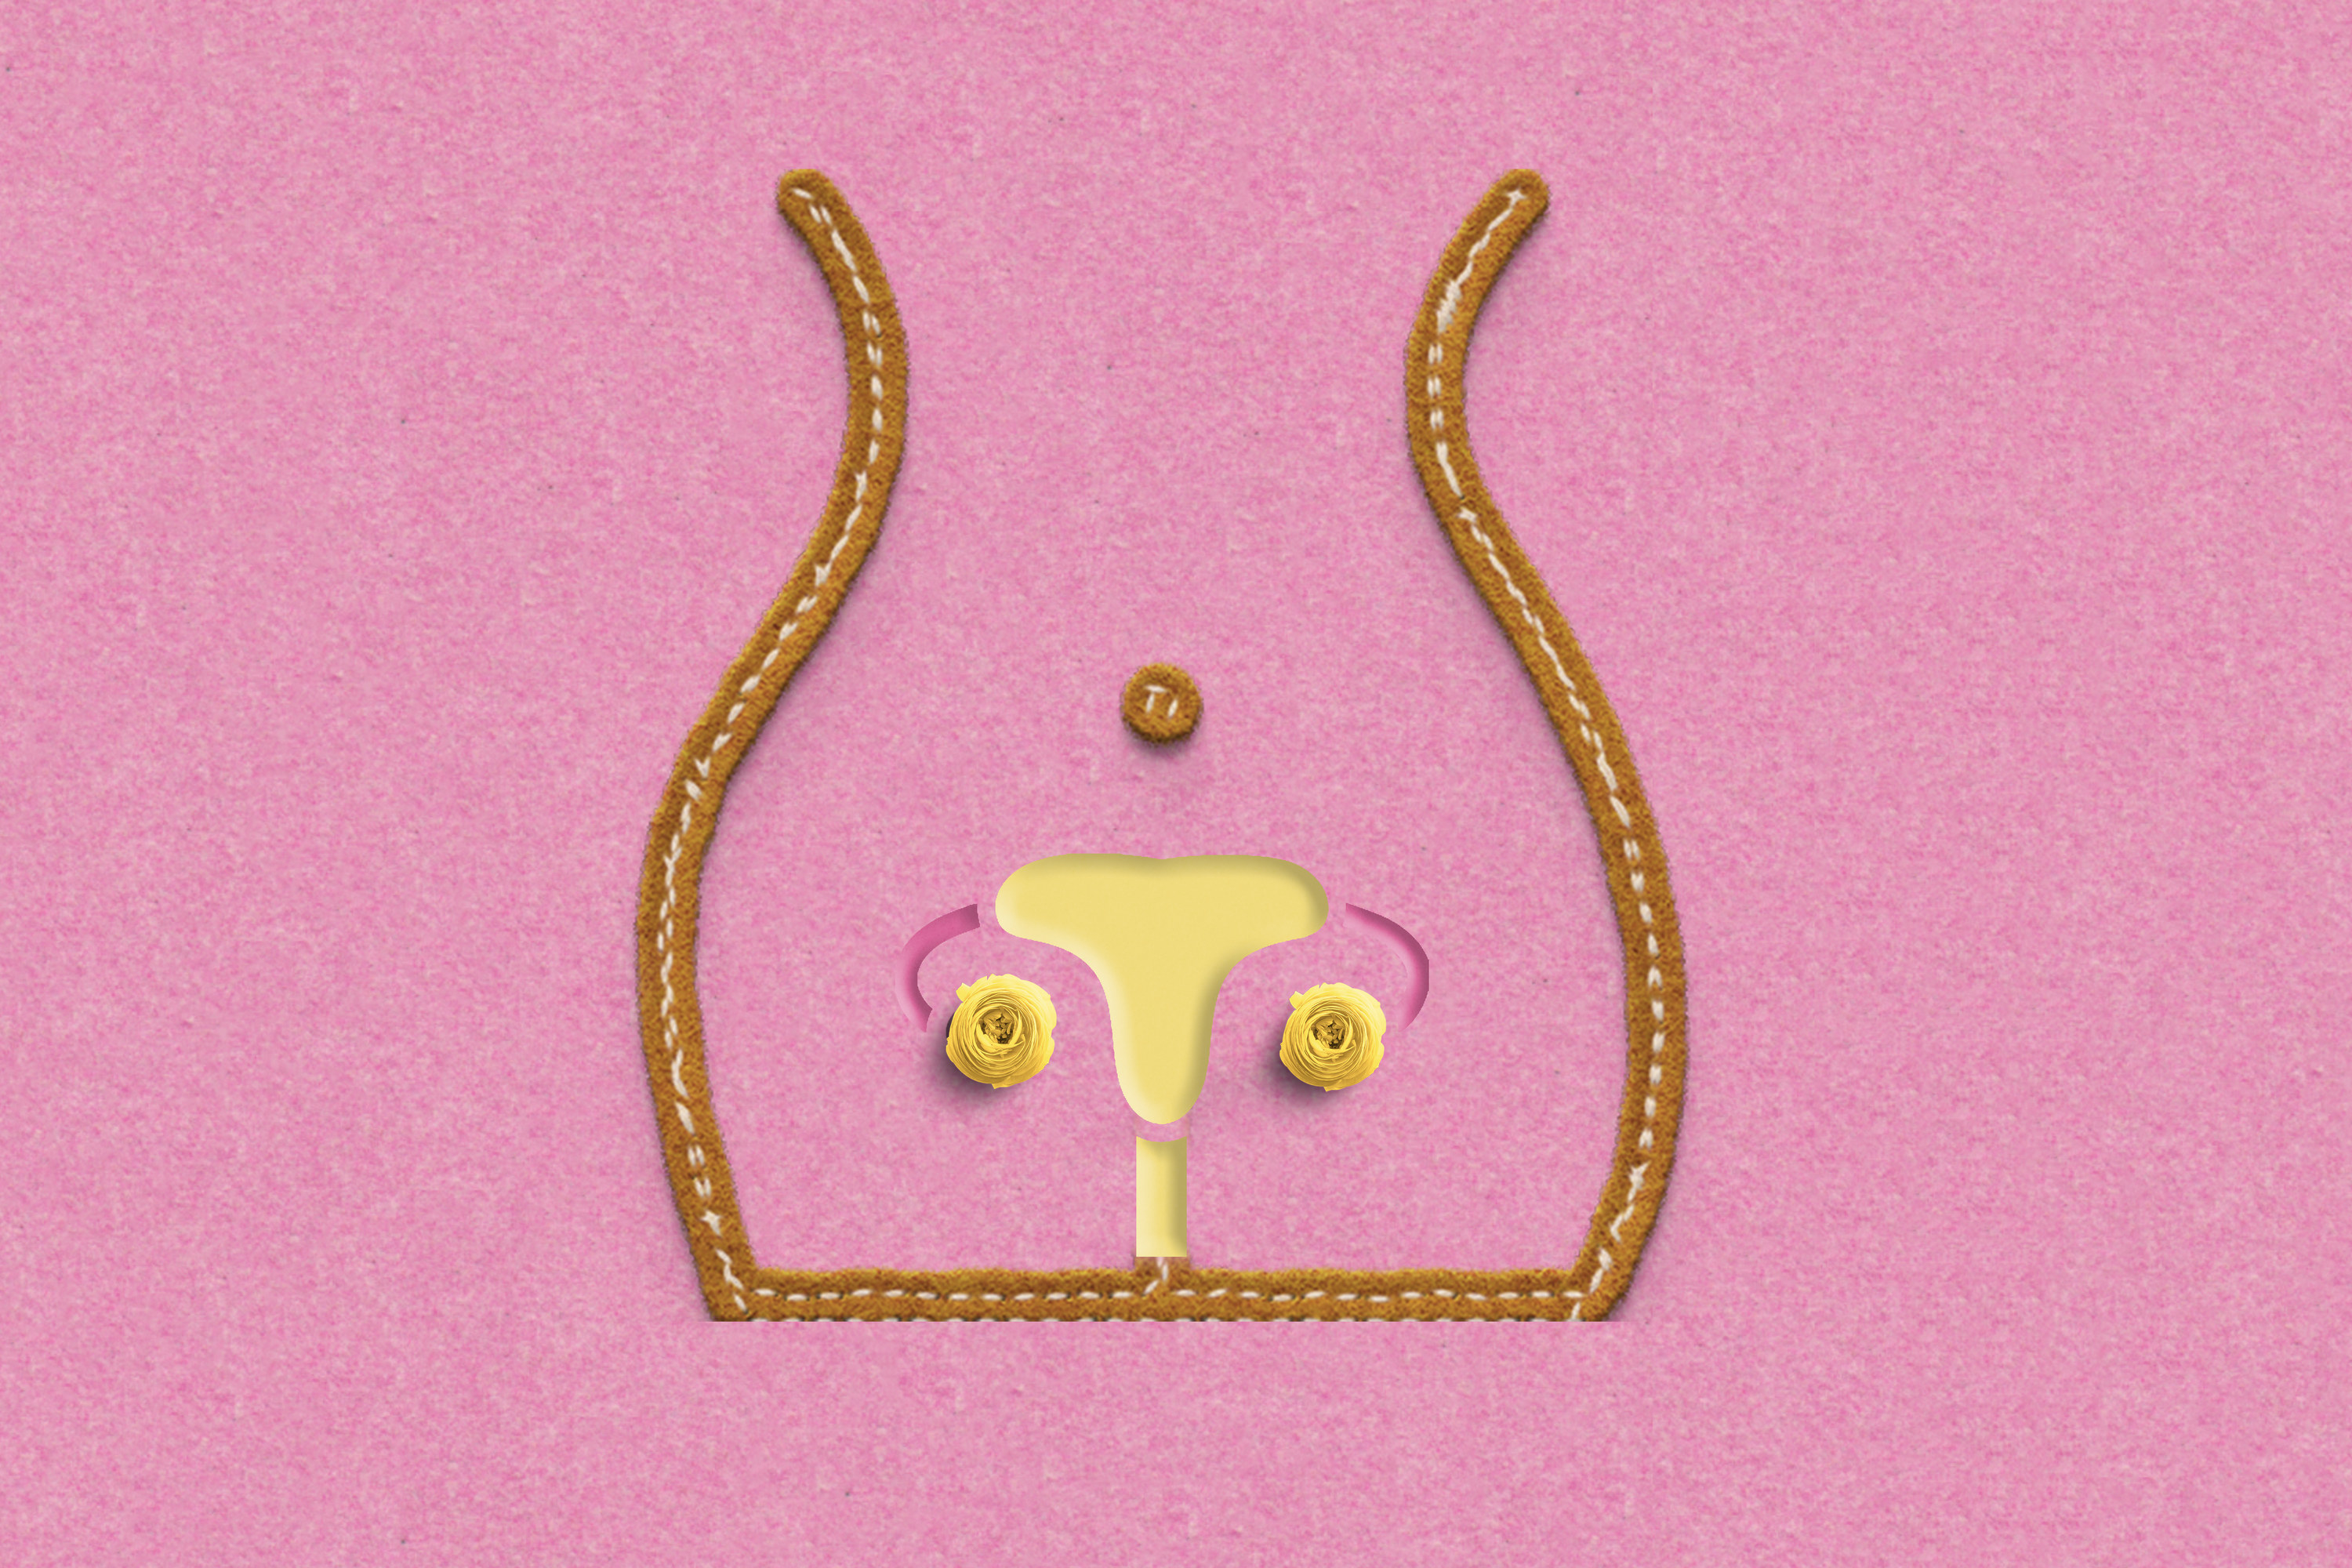 An illustrated image of a uterus and ovaries